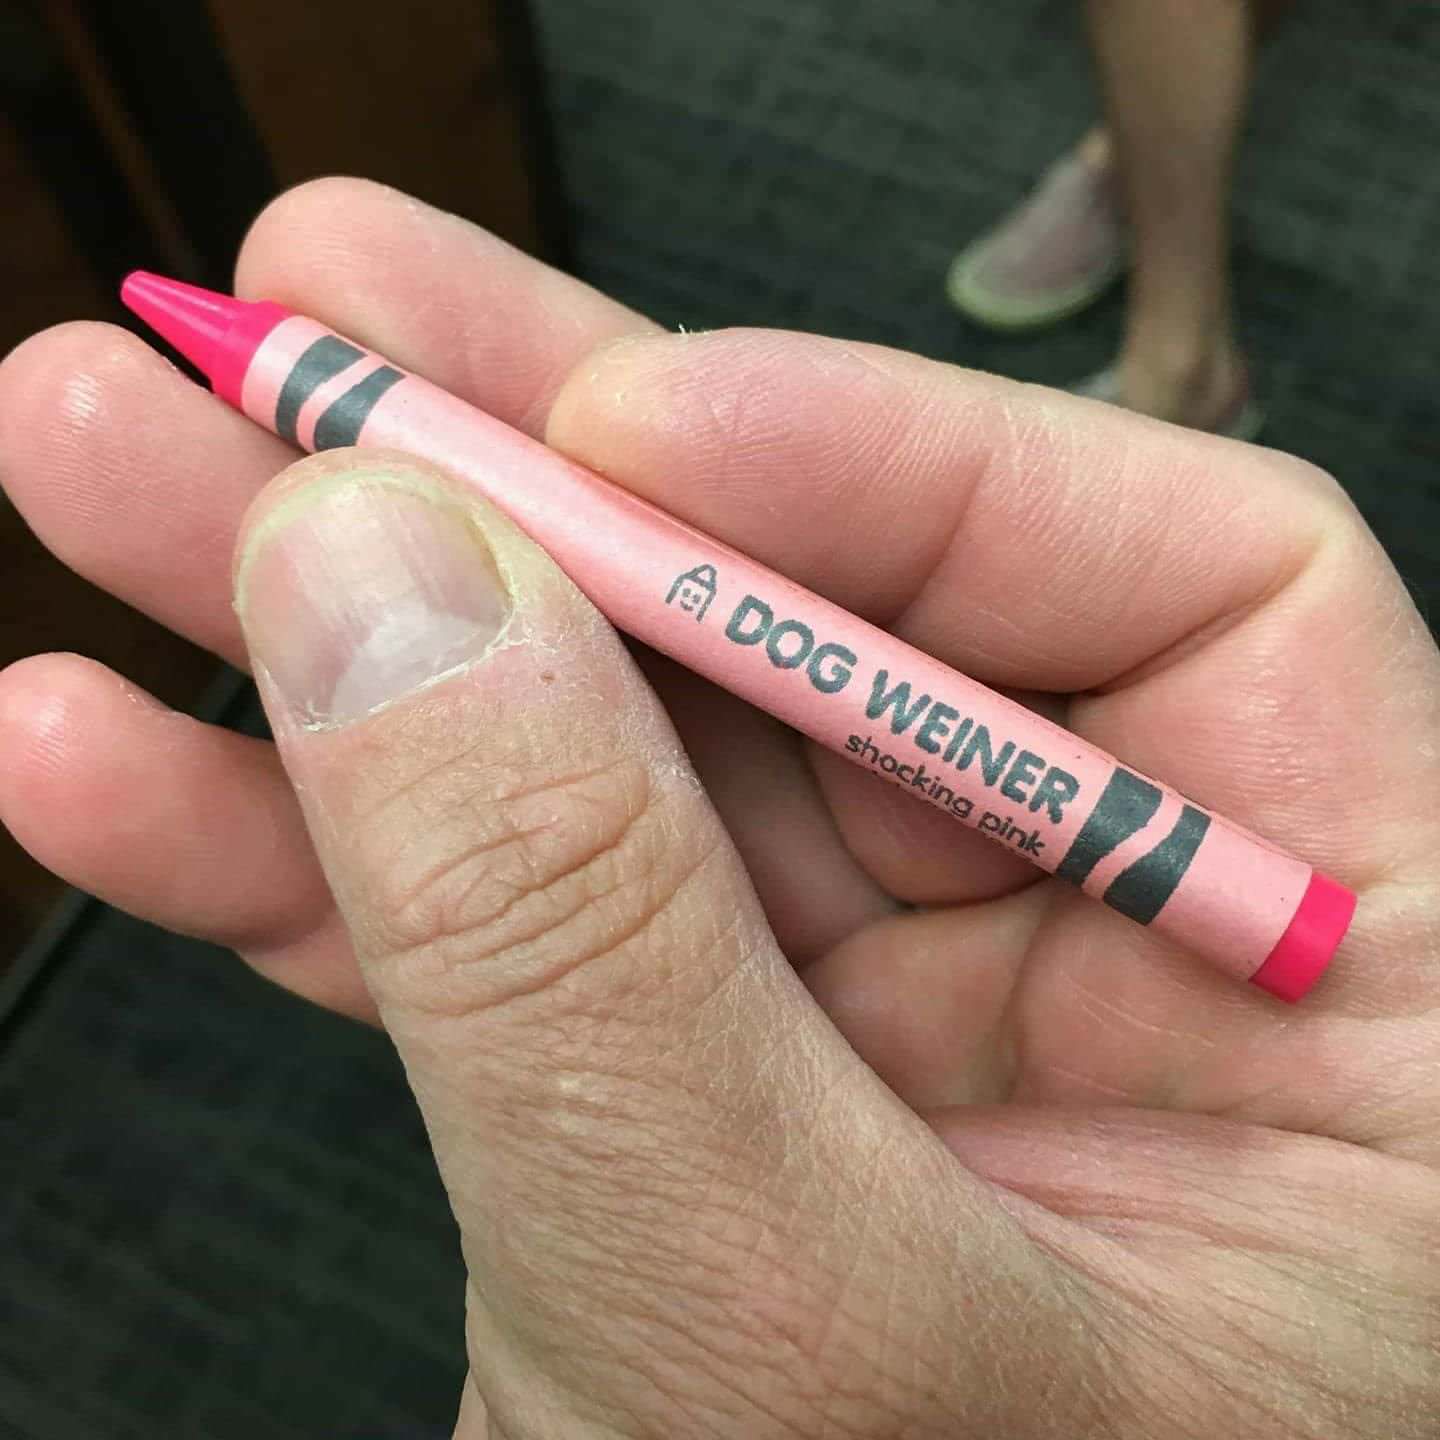 Dog Weiner colored crayon and that is exactly what it is.